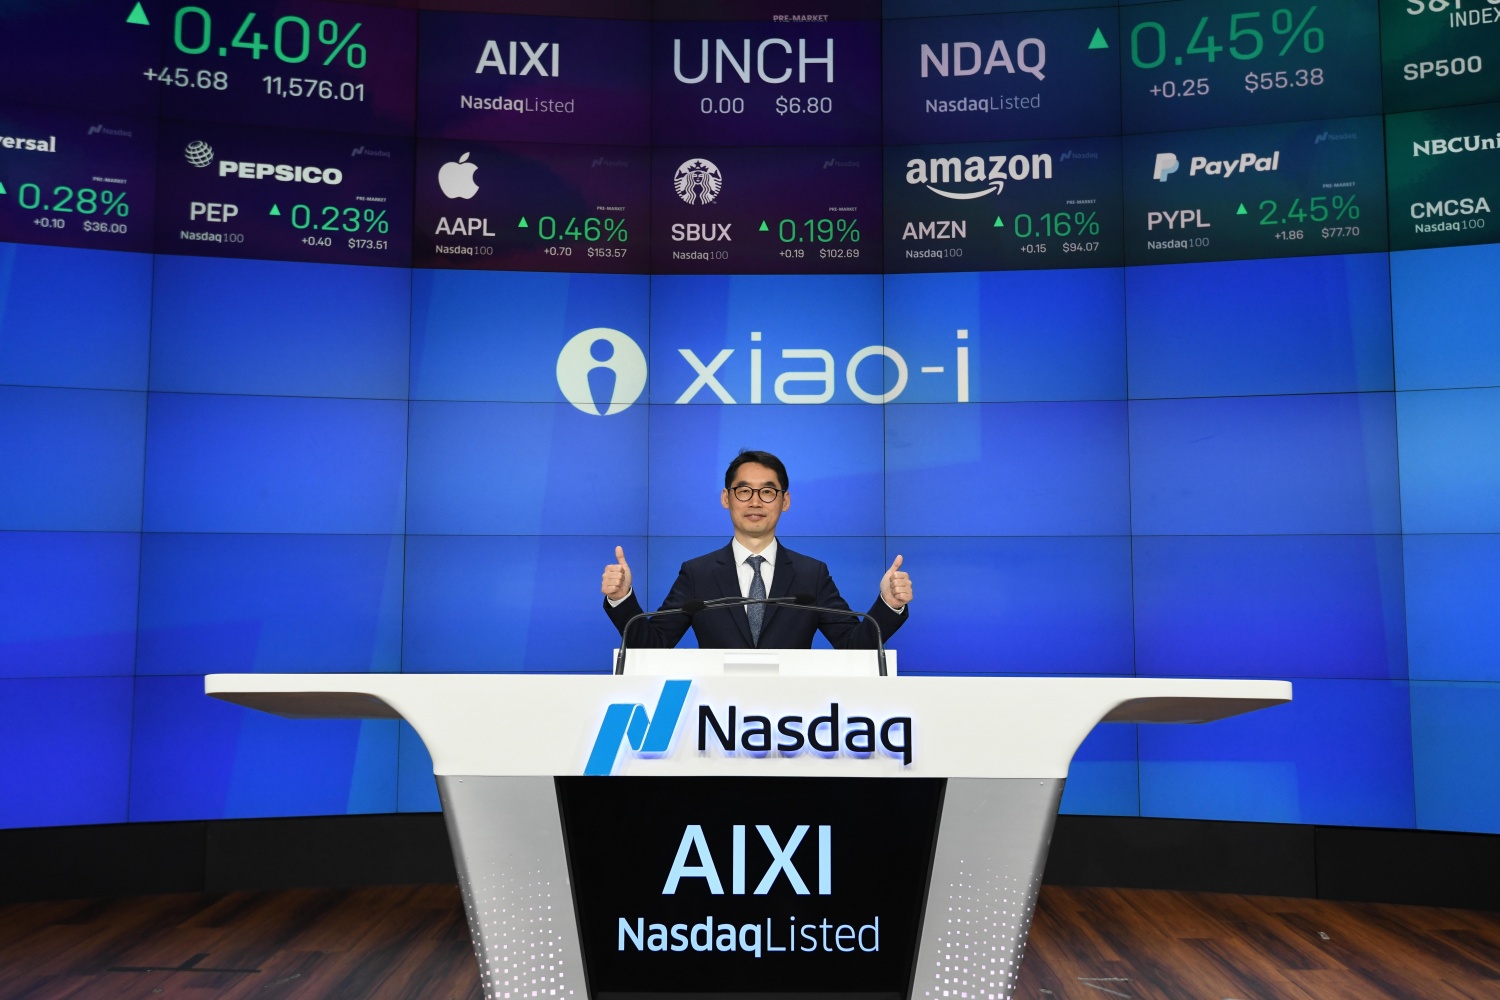 Xiao-i is listed on Nasdaq since 2023